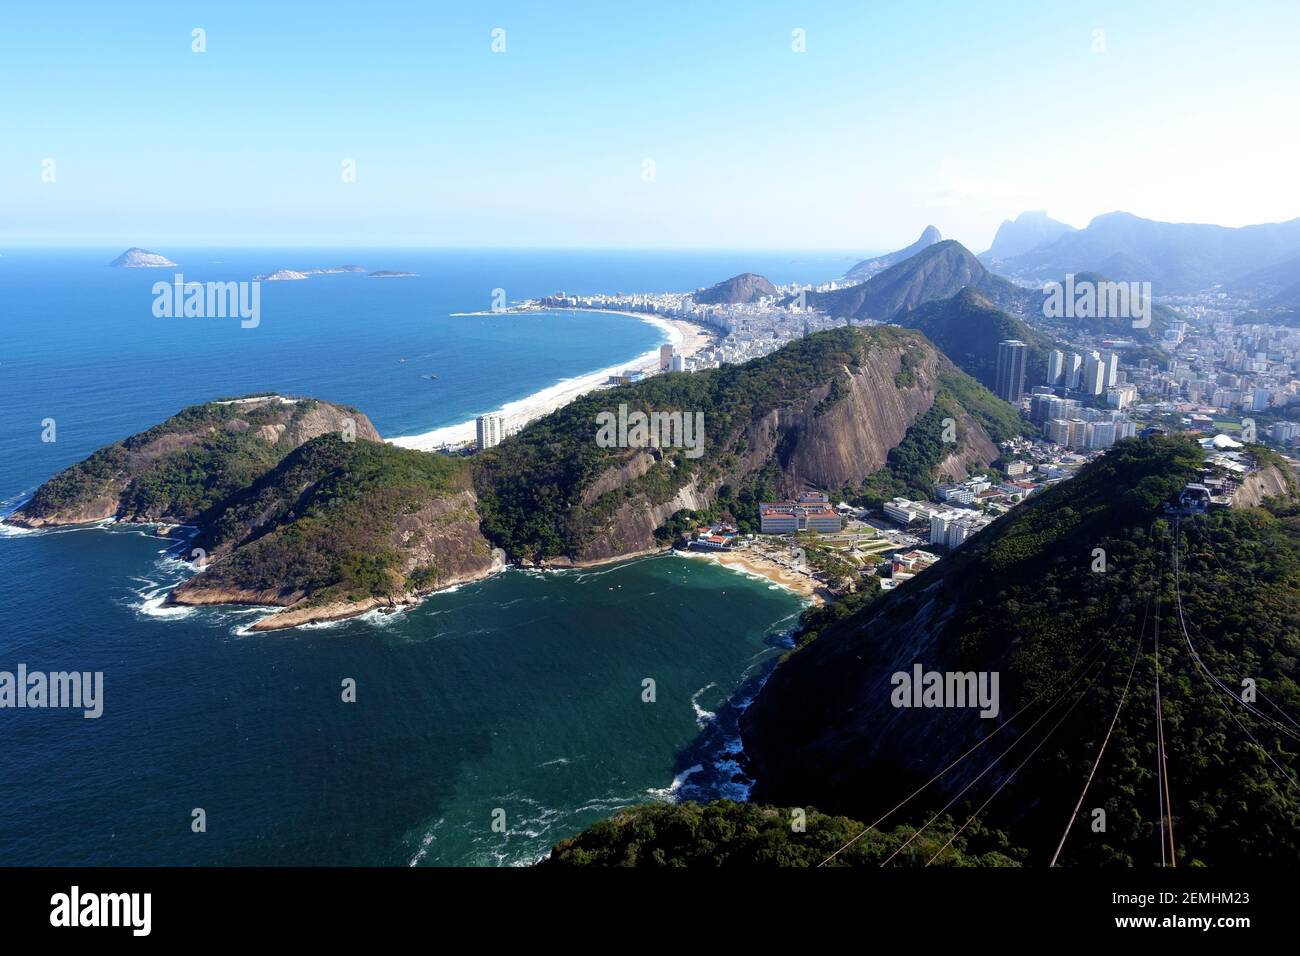 View from the top of Sugarloaf mountain in Rio de Janeiro, Brazil showing the long stretch of Copacabana beach and the Stock Photo